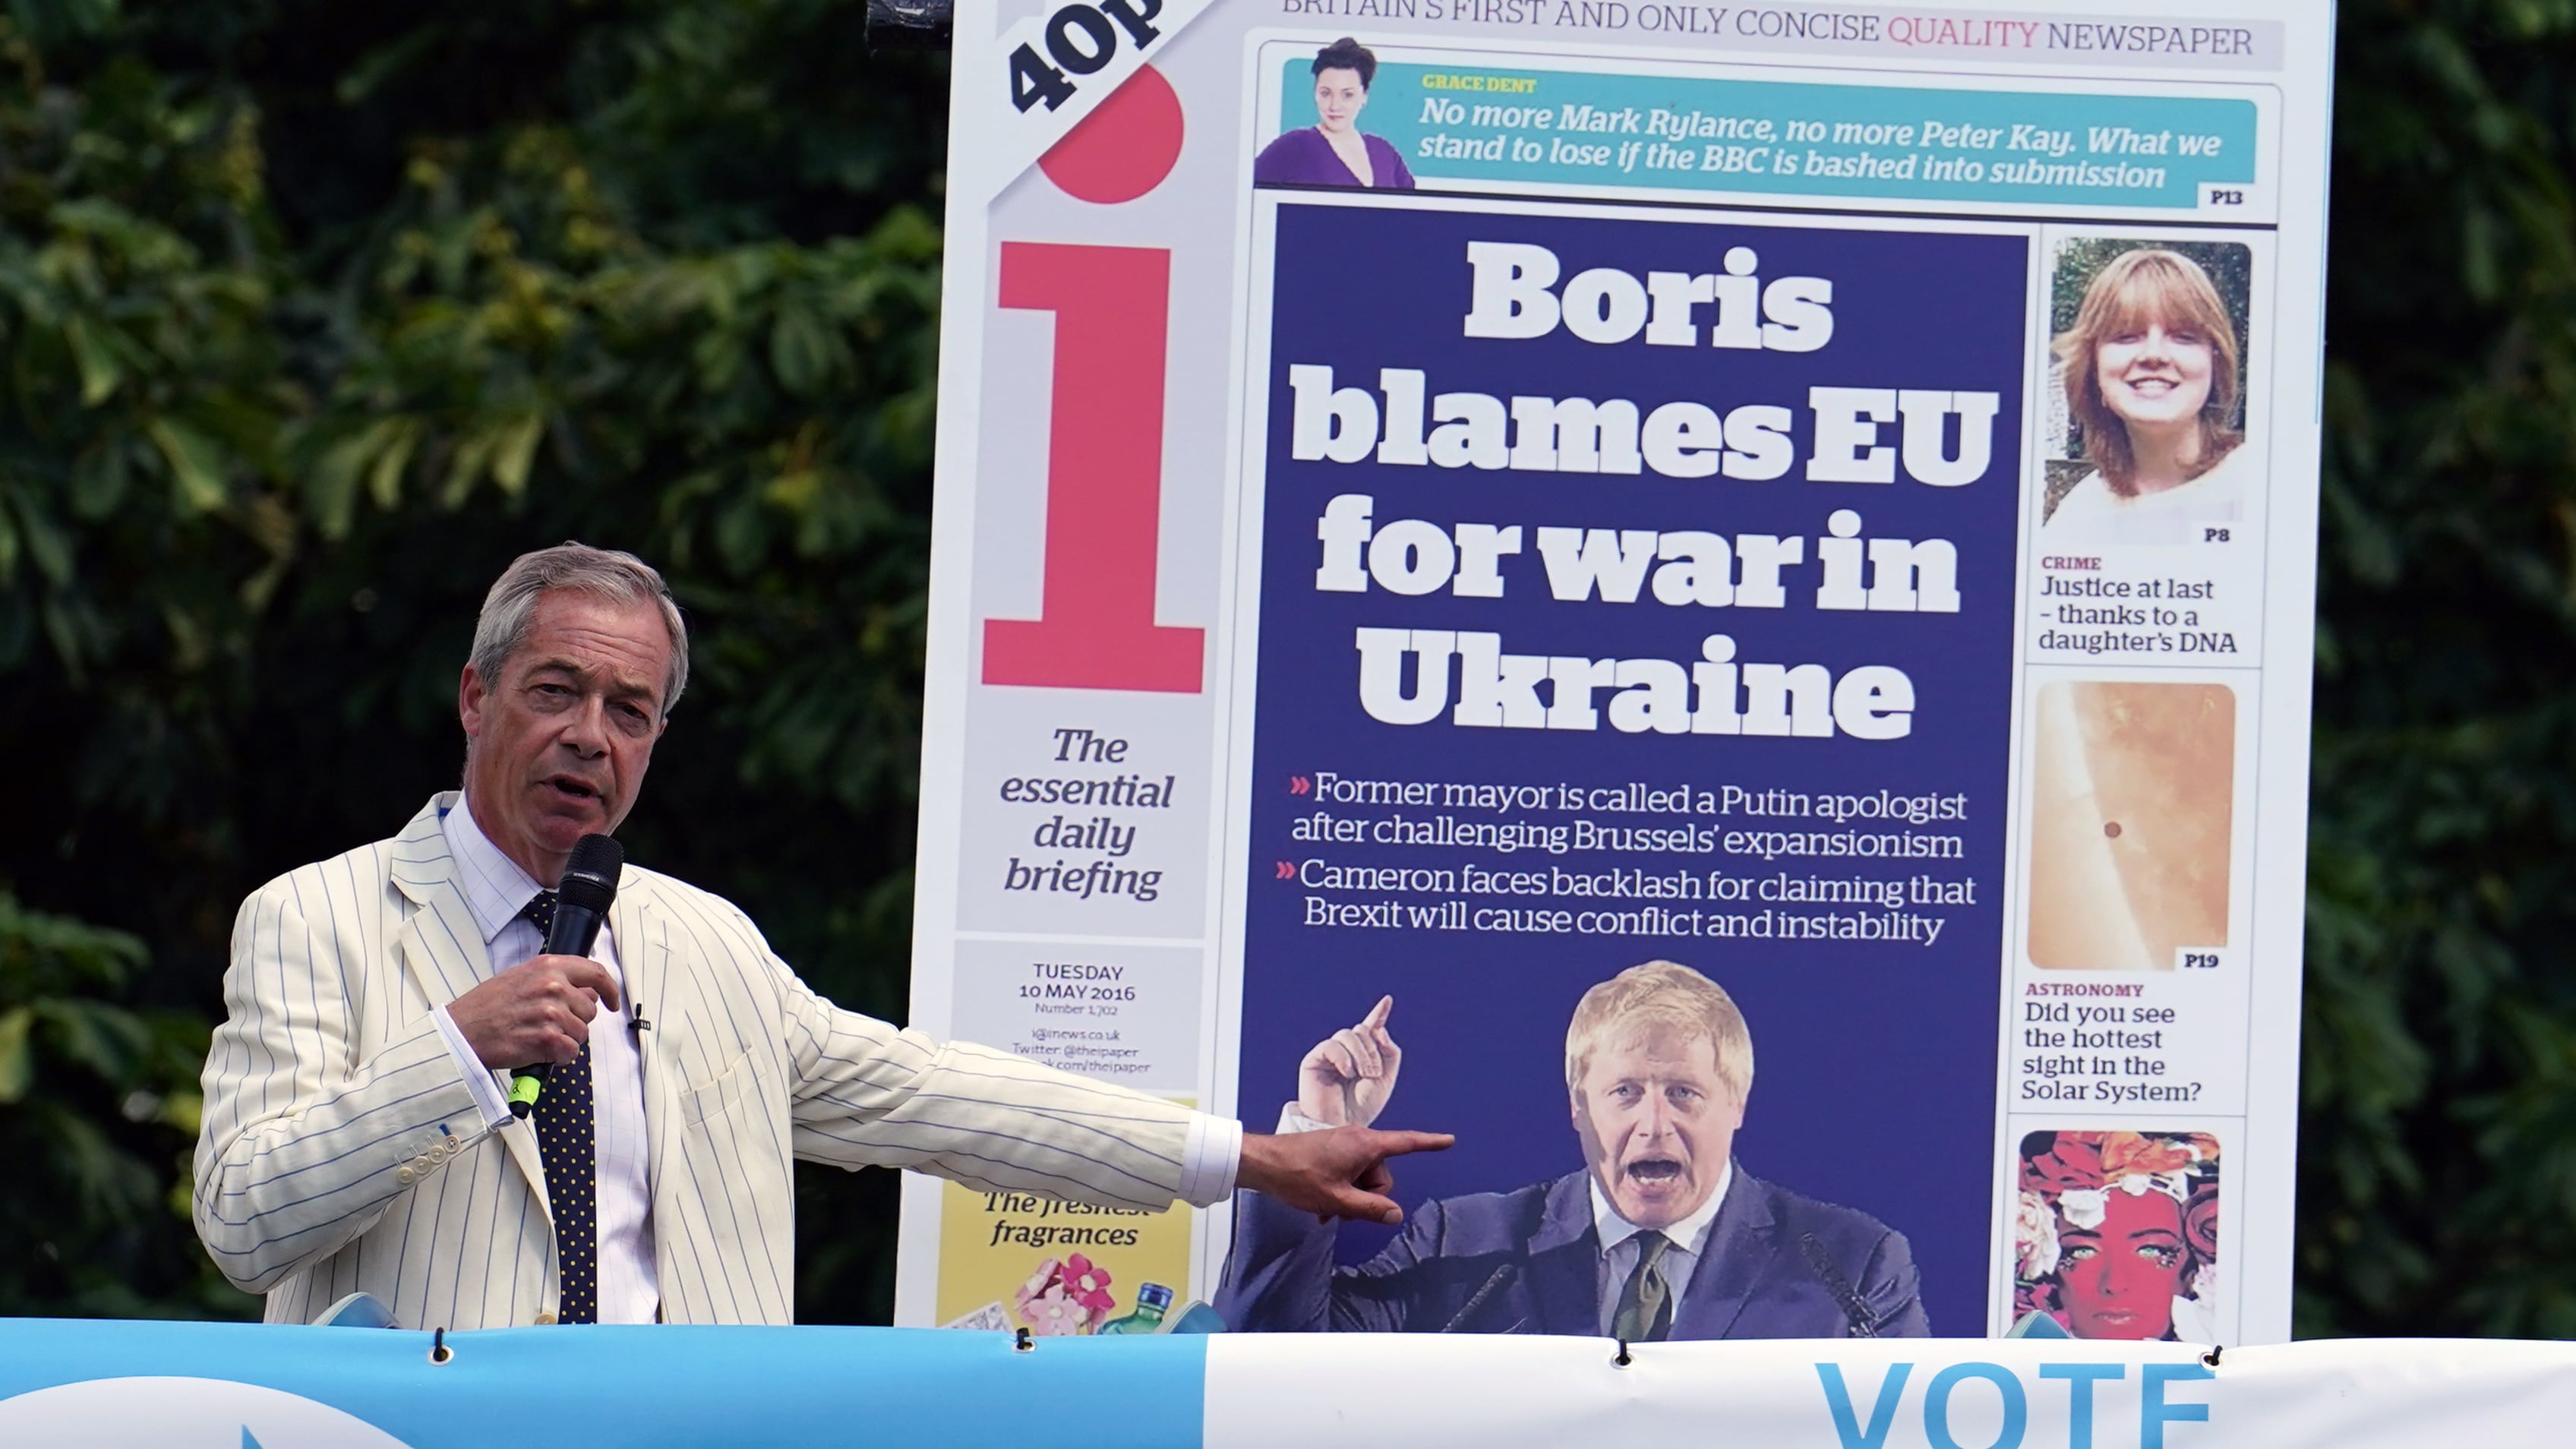 Reform UK leader Nigel Farage said he would ‘never, ever defend’ Russian President Vladimir Putin, as he ramped up his row with former prime minister Boris Johnson